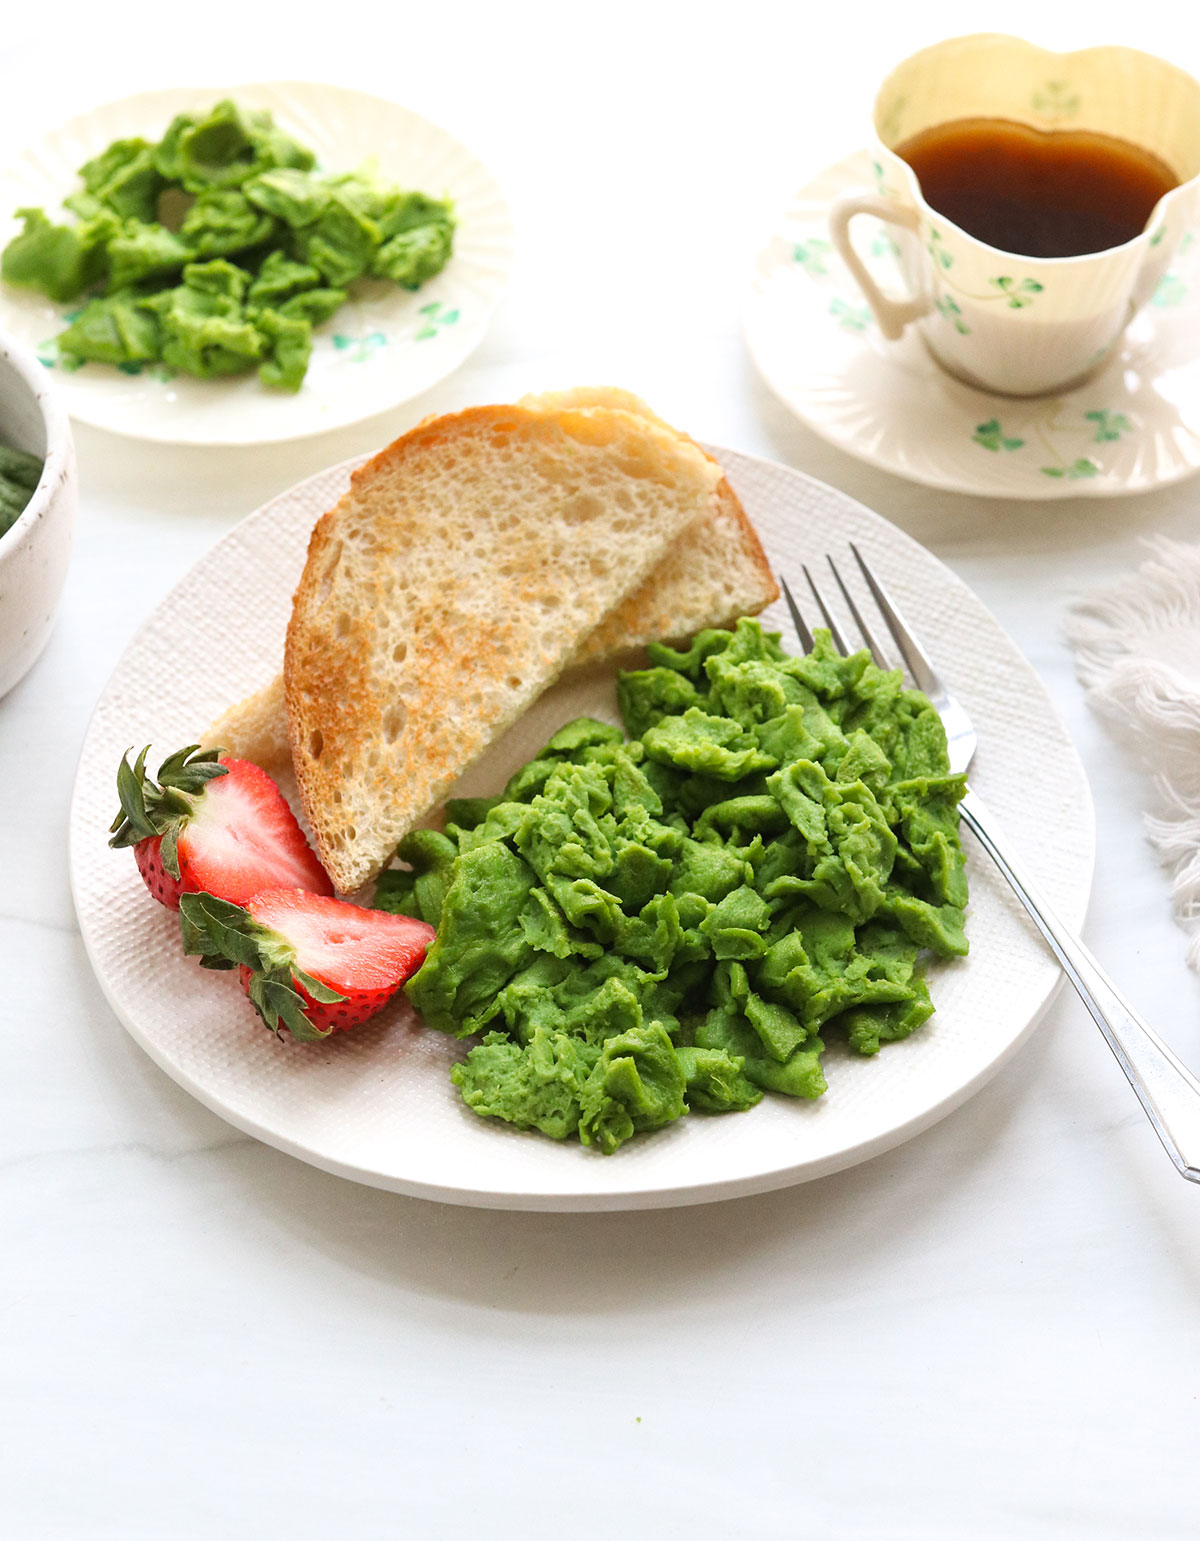 green eggs served on a plate with toast and strawberries.